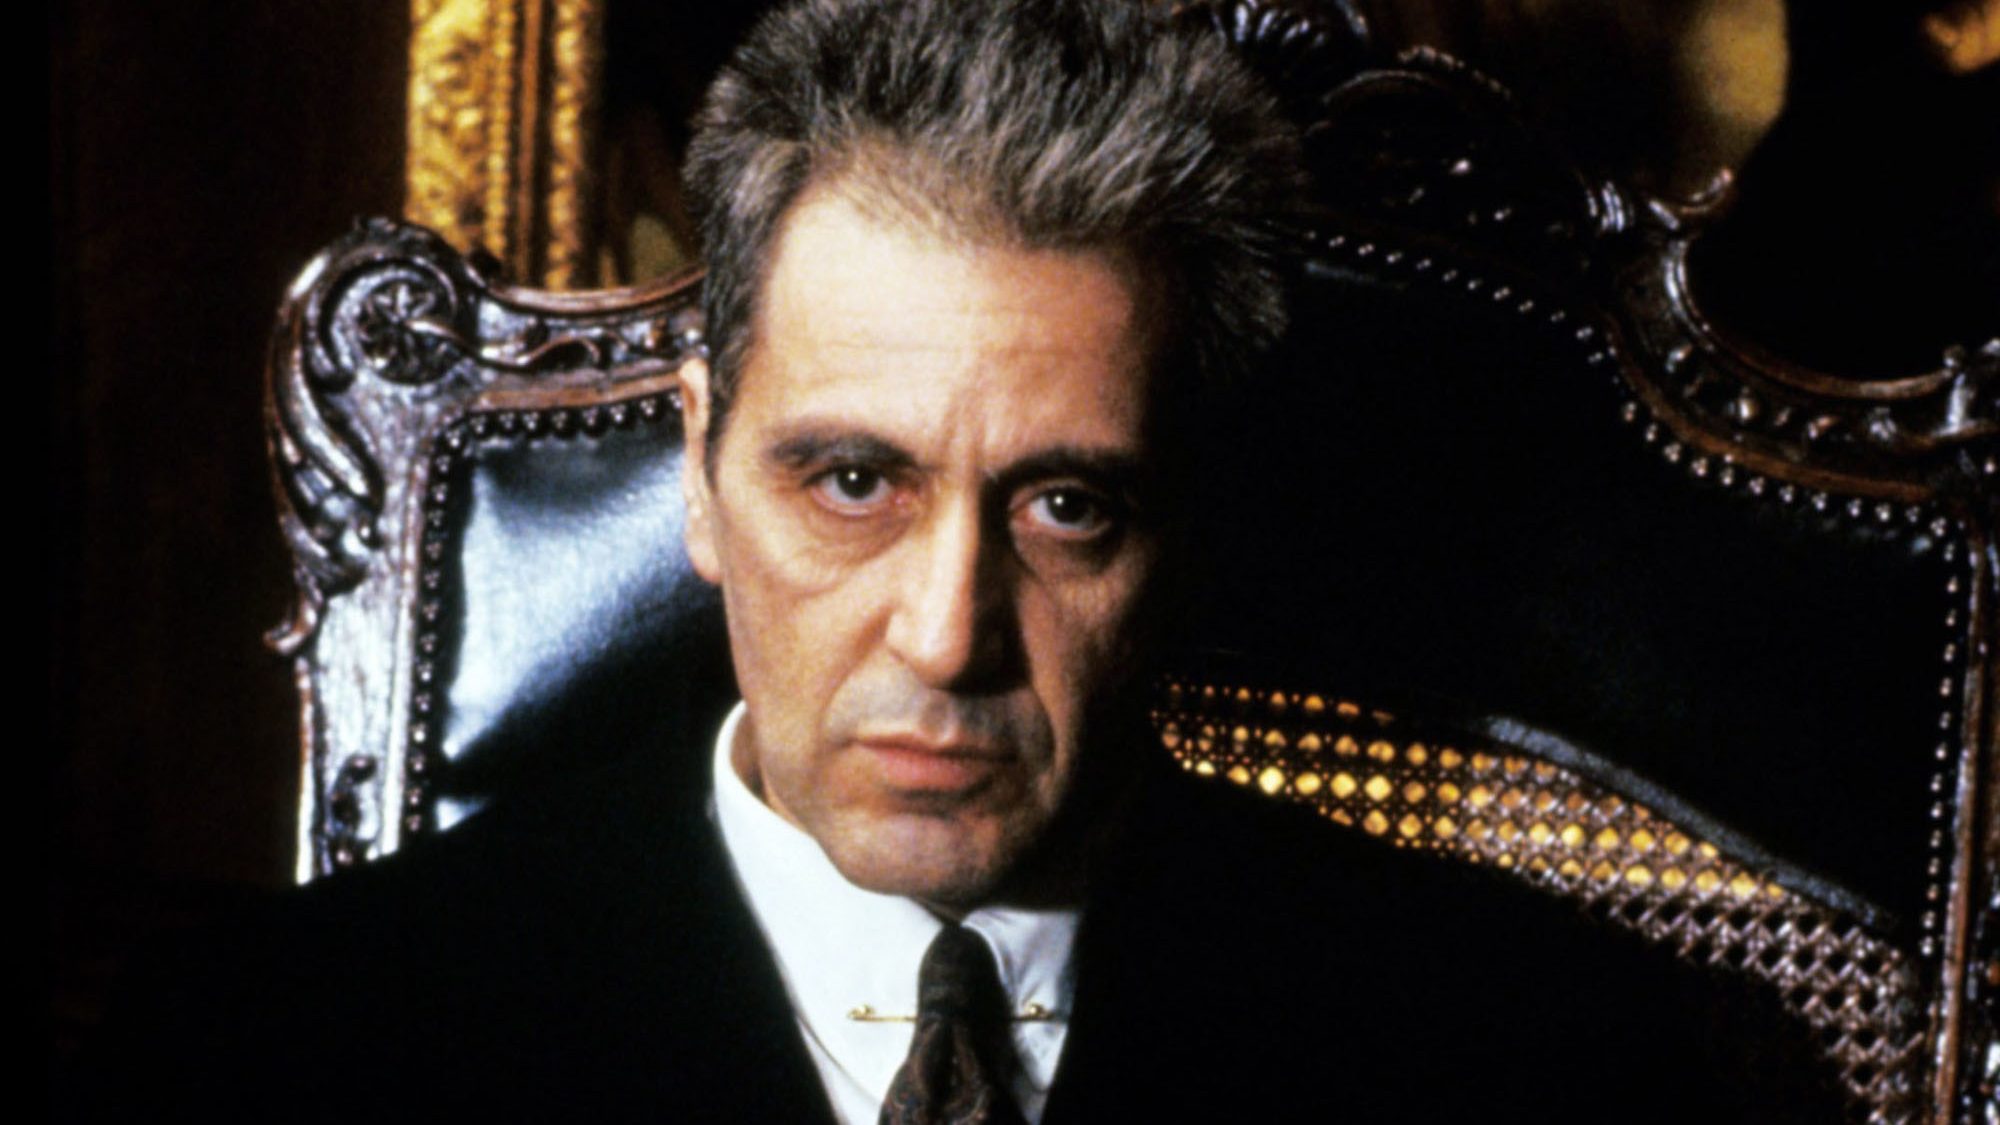 Where To Watch The Godfather 3 For Free?